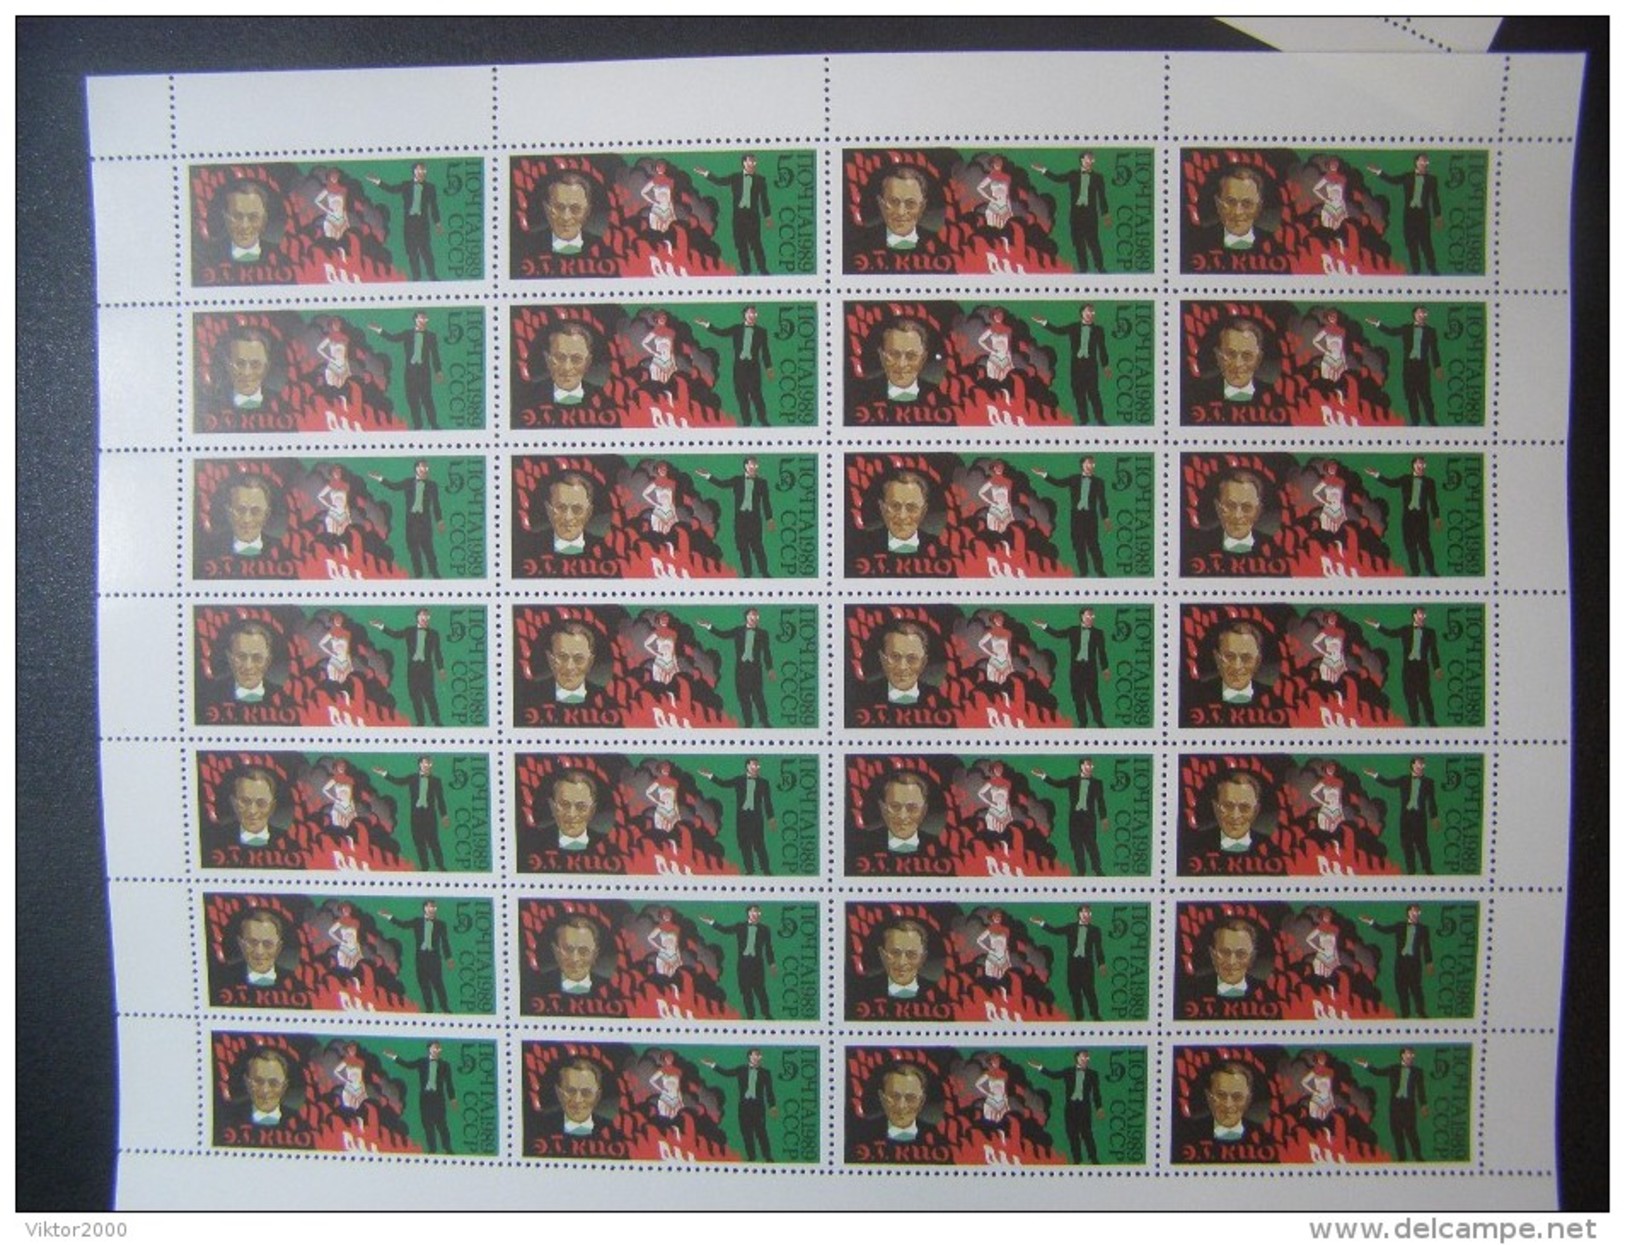 RUSSIA 1989 MNH (**)YVERT 5660-5664/Michel 5984-5988 Circus/ Series/ Sheets - Feuilles Complètes